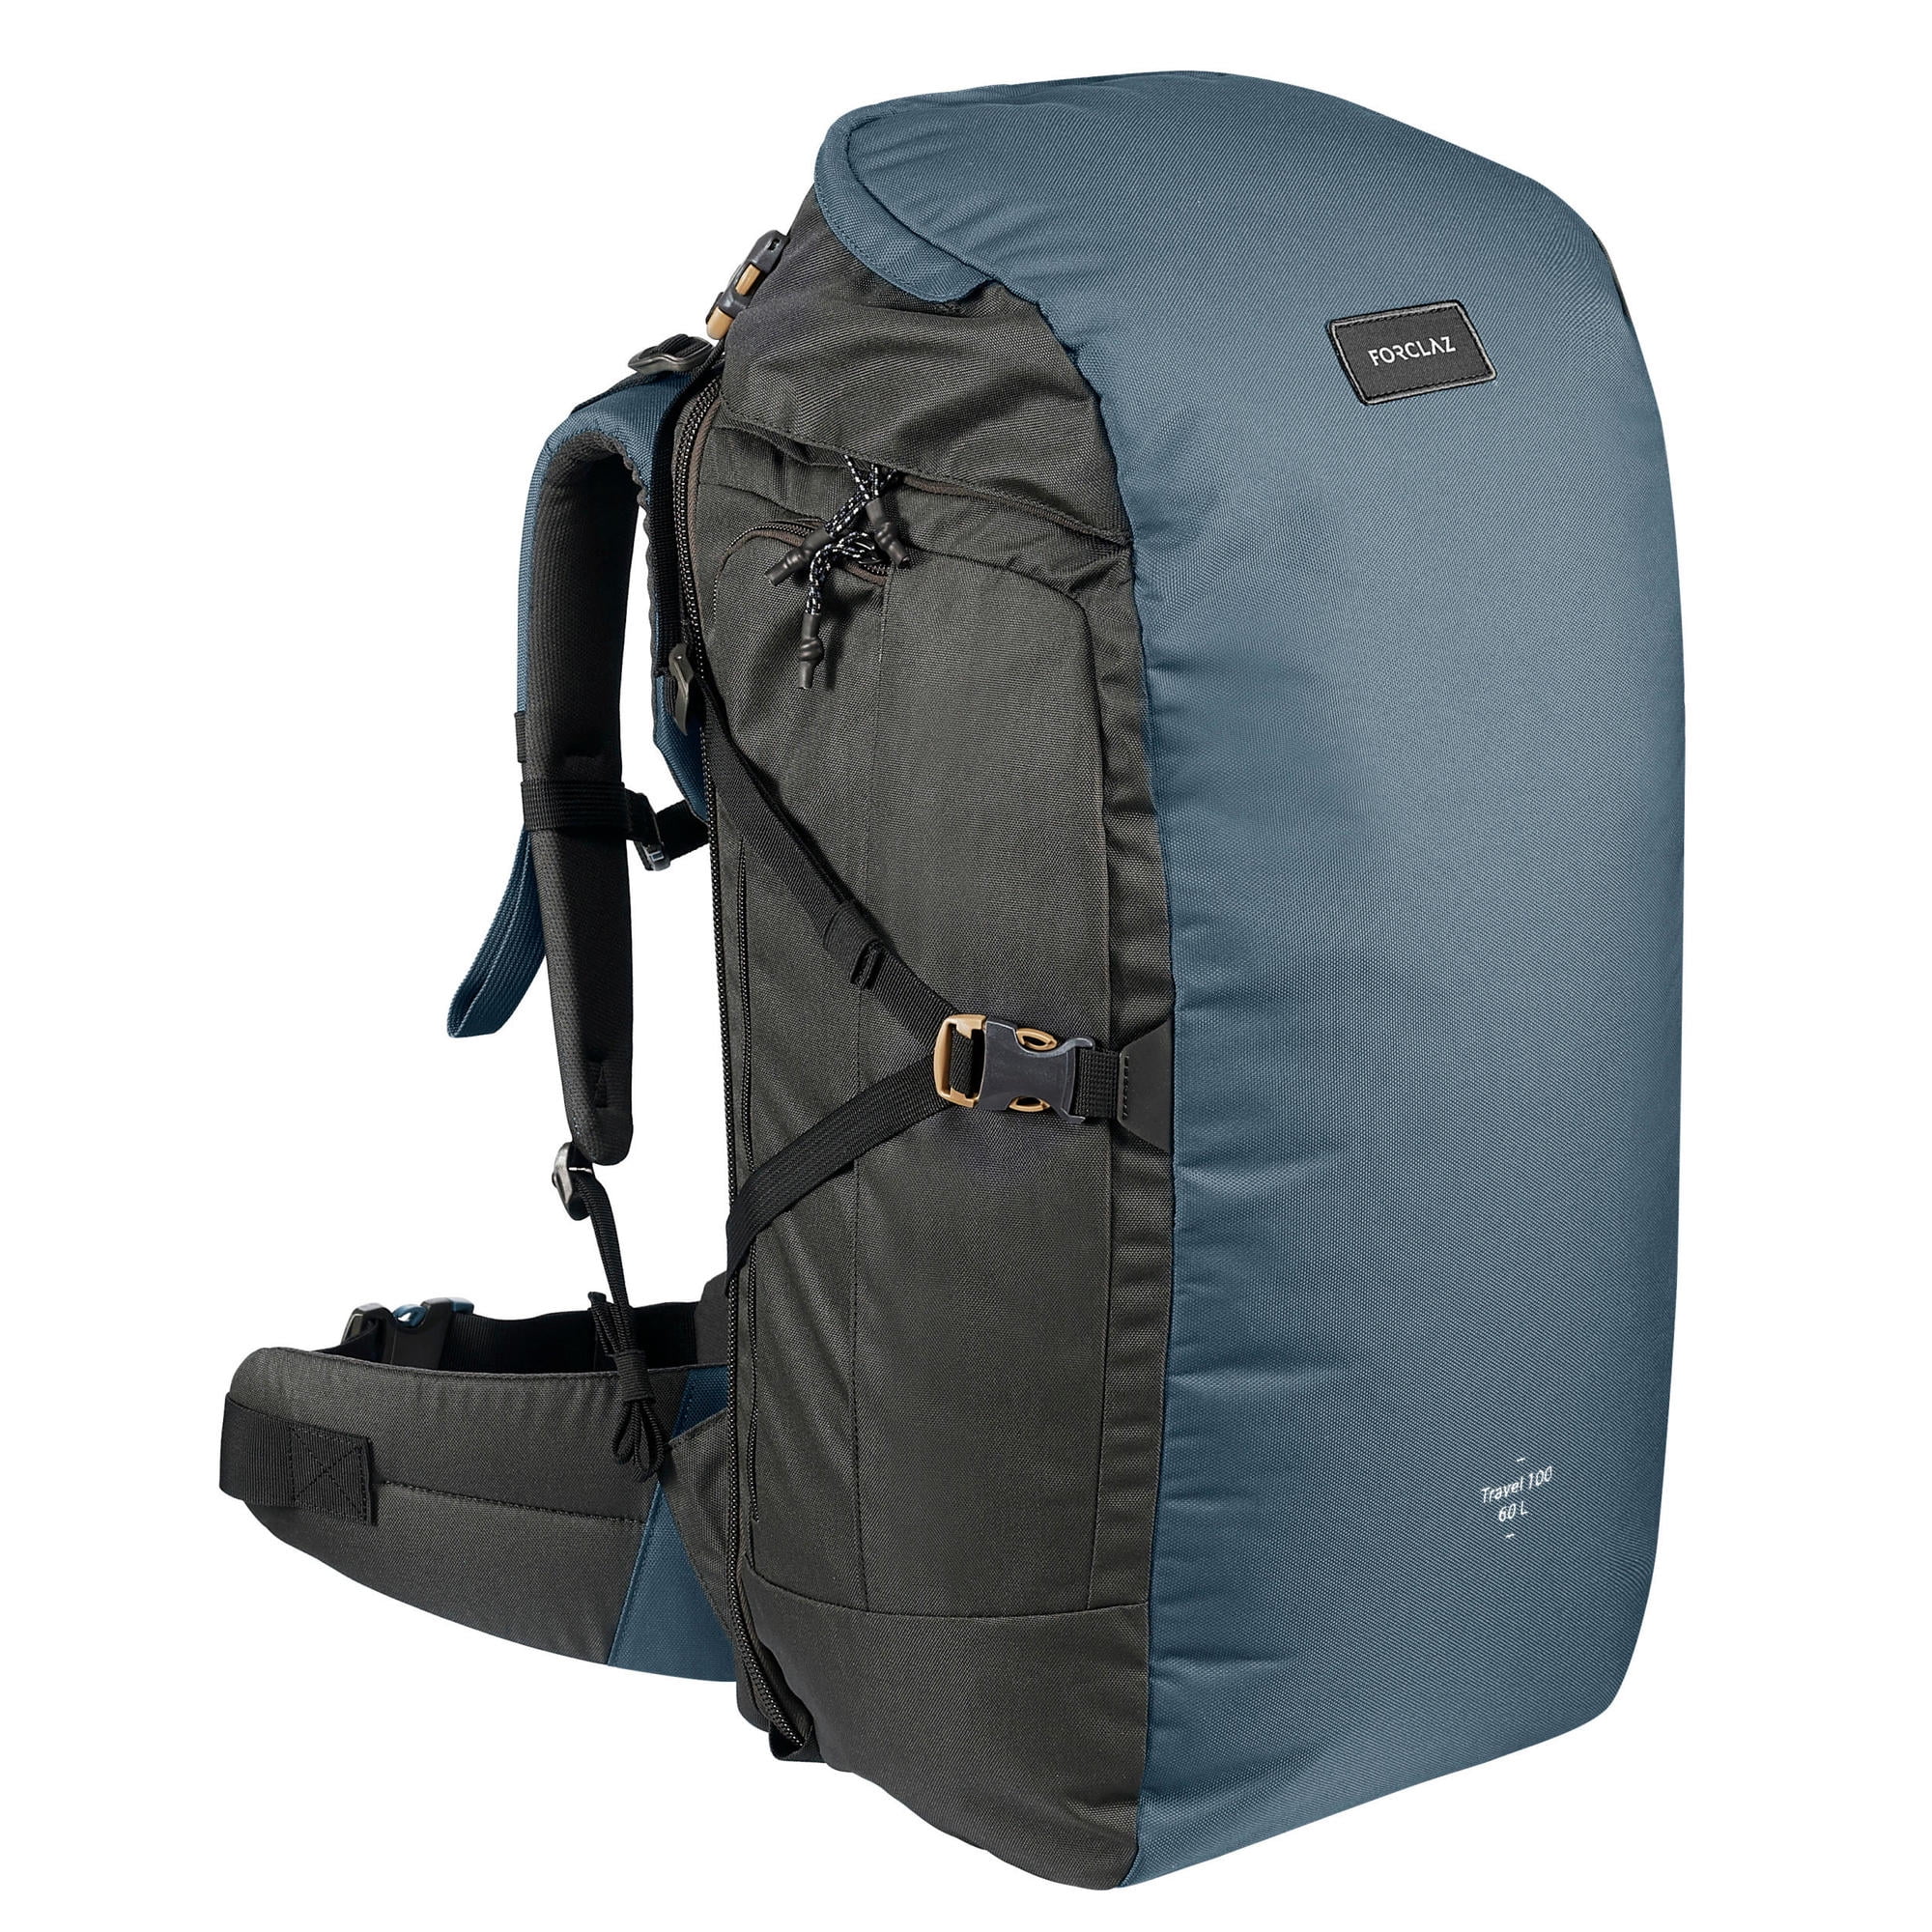 Forclaz by DECATHLON - BACKPACK TRAVEL 